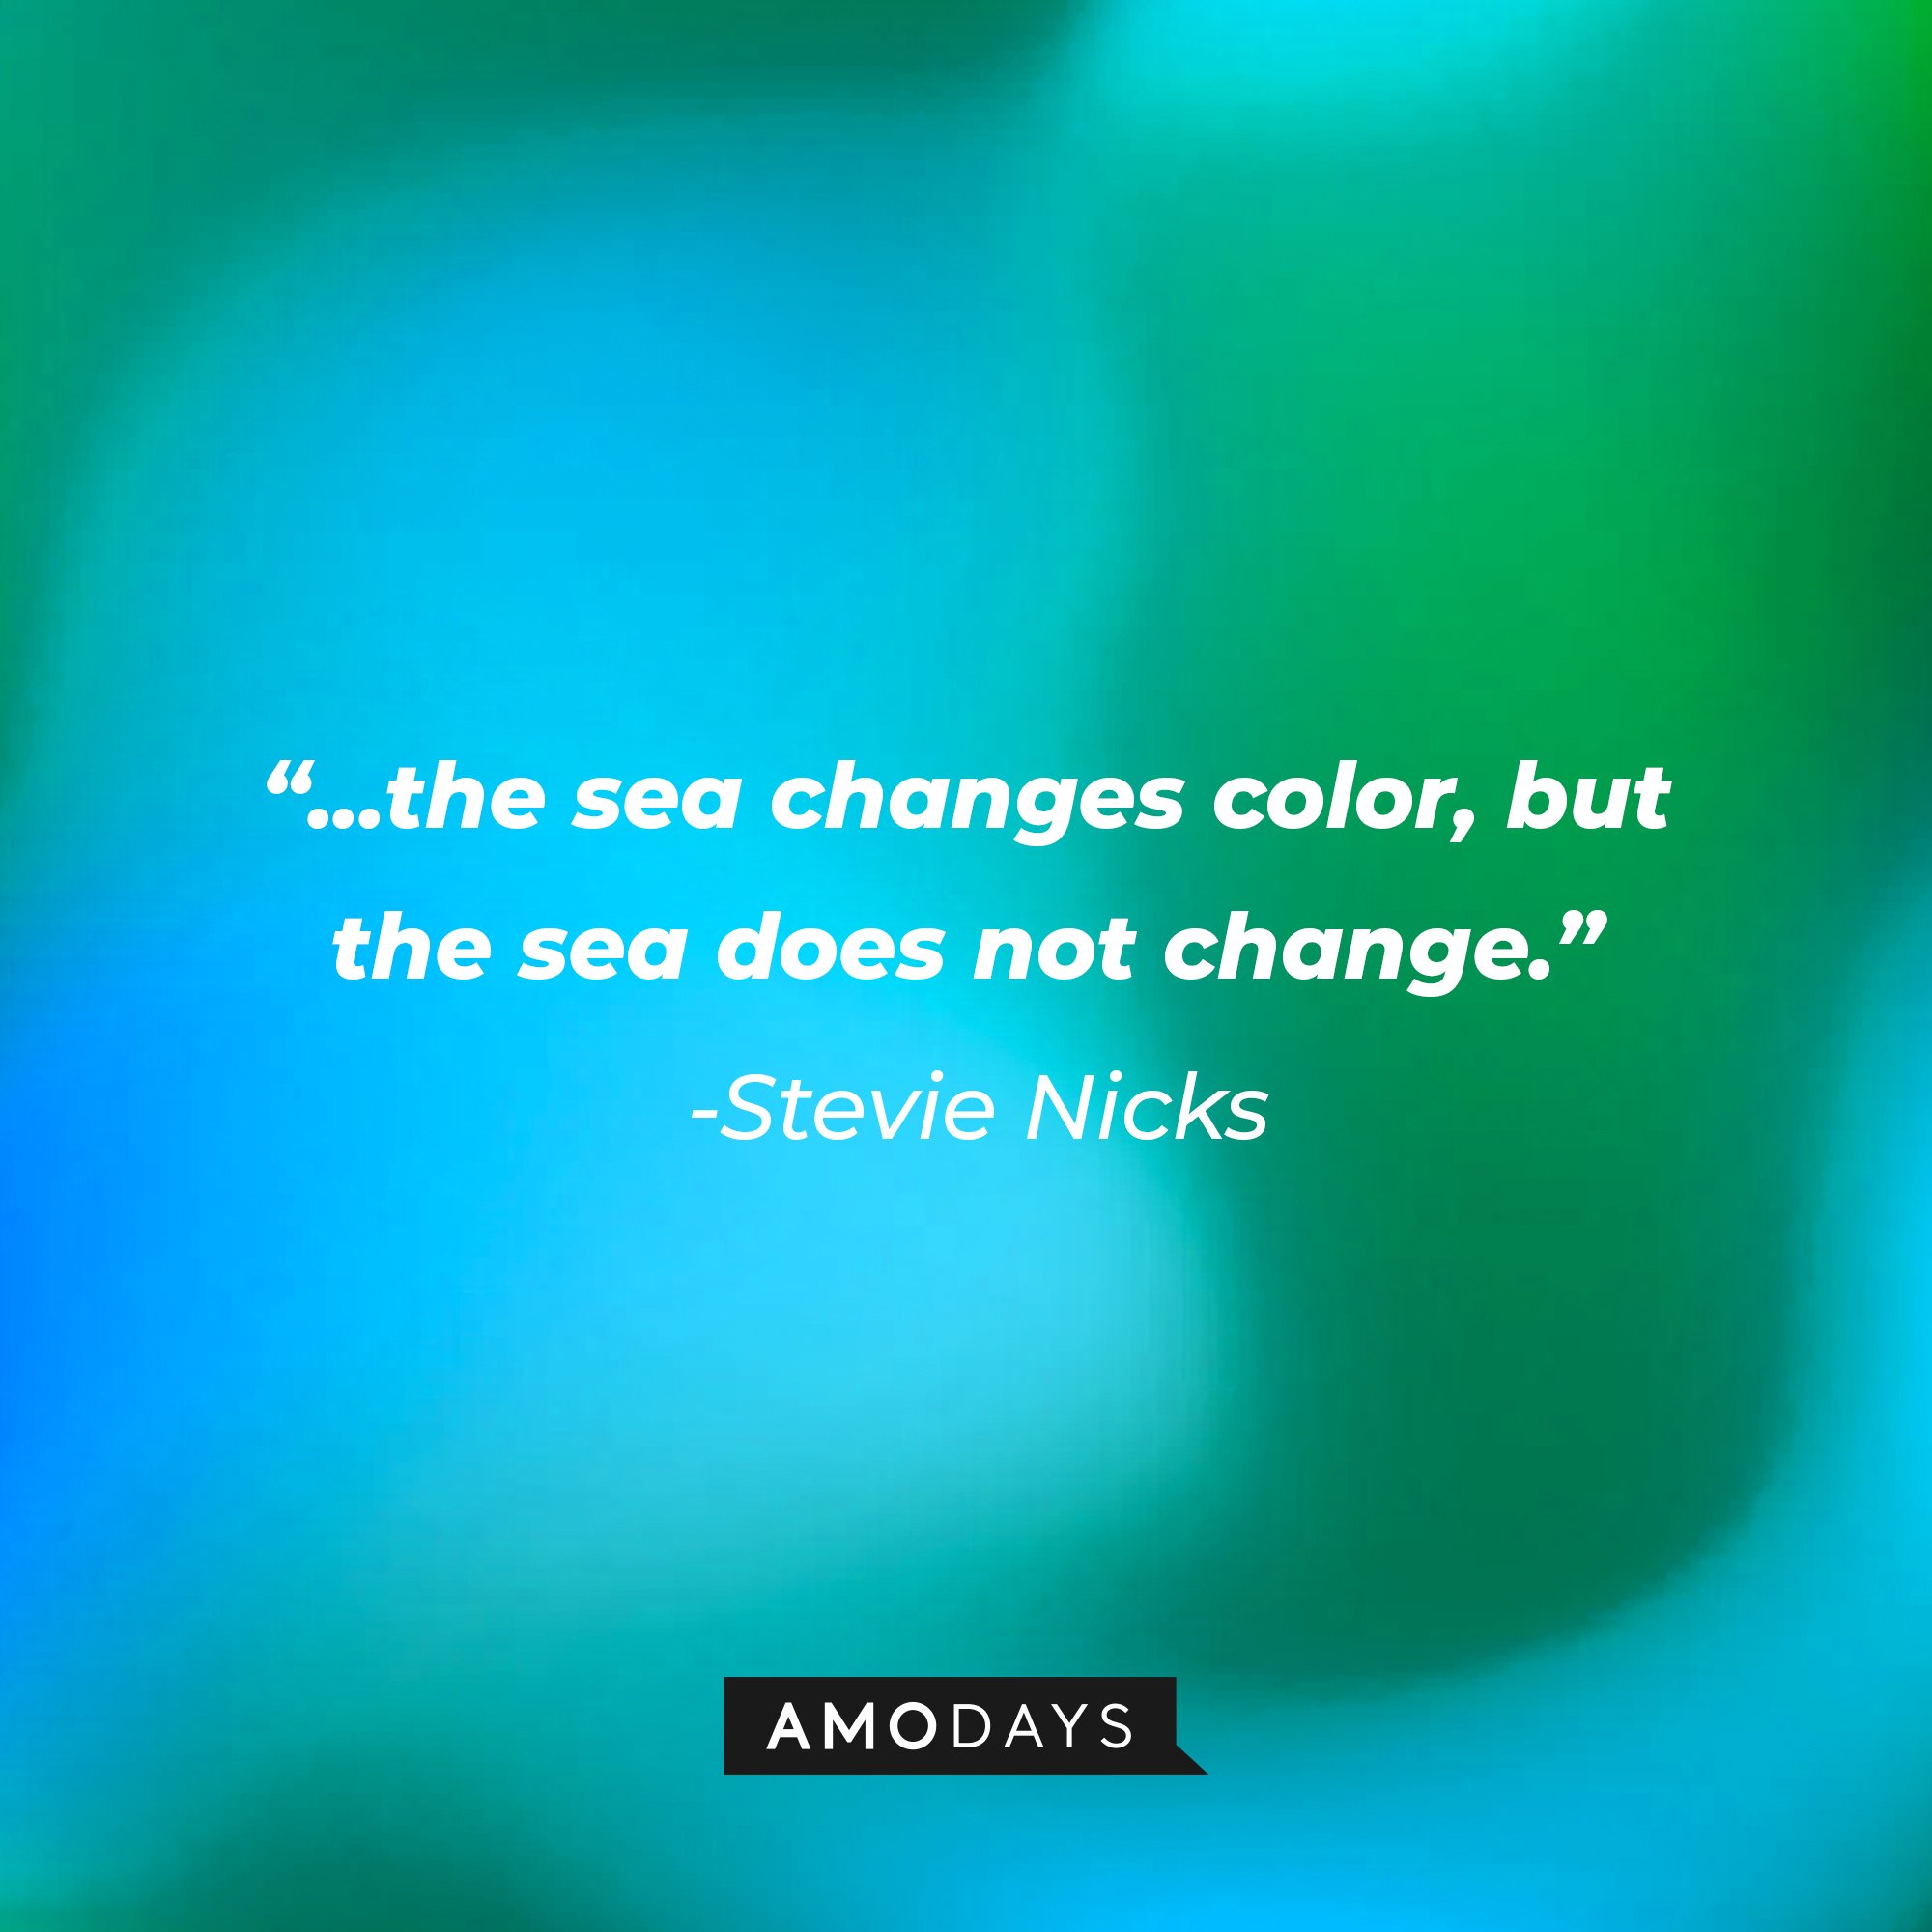 Stevie Nicks's quote: "...the sea changes color, but the sea does not change." | Image: AmoDays